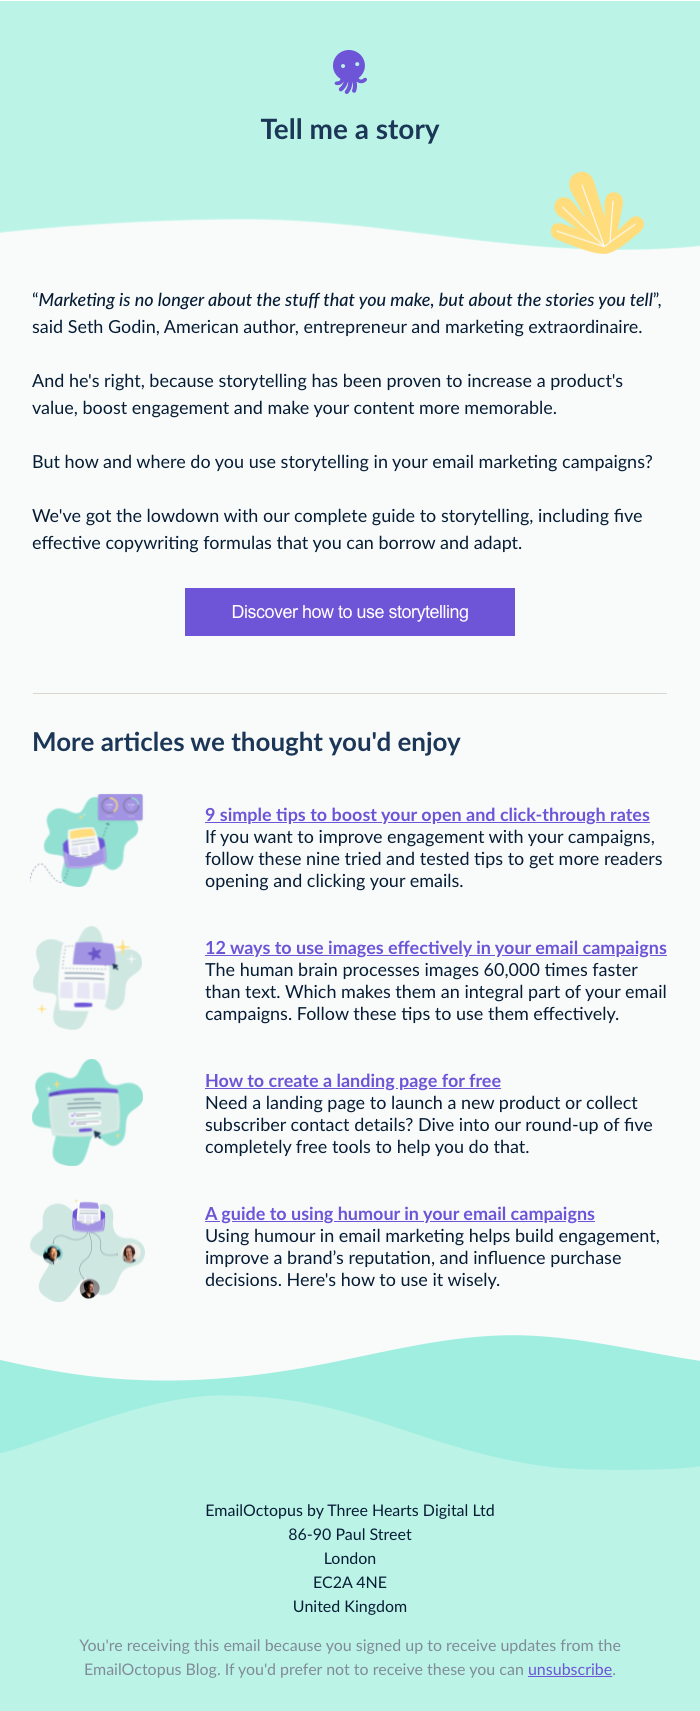 Example of a newsletter repurposing blog content in an email in the form of a round-up